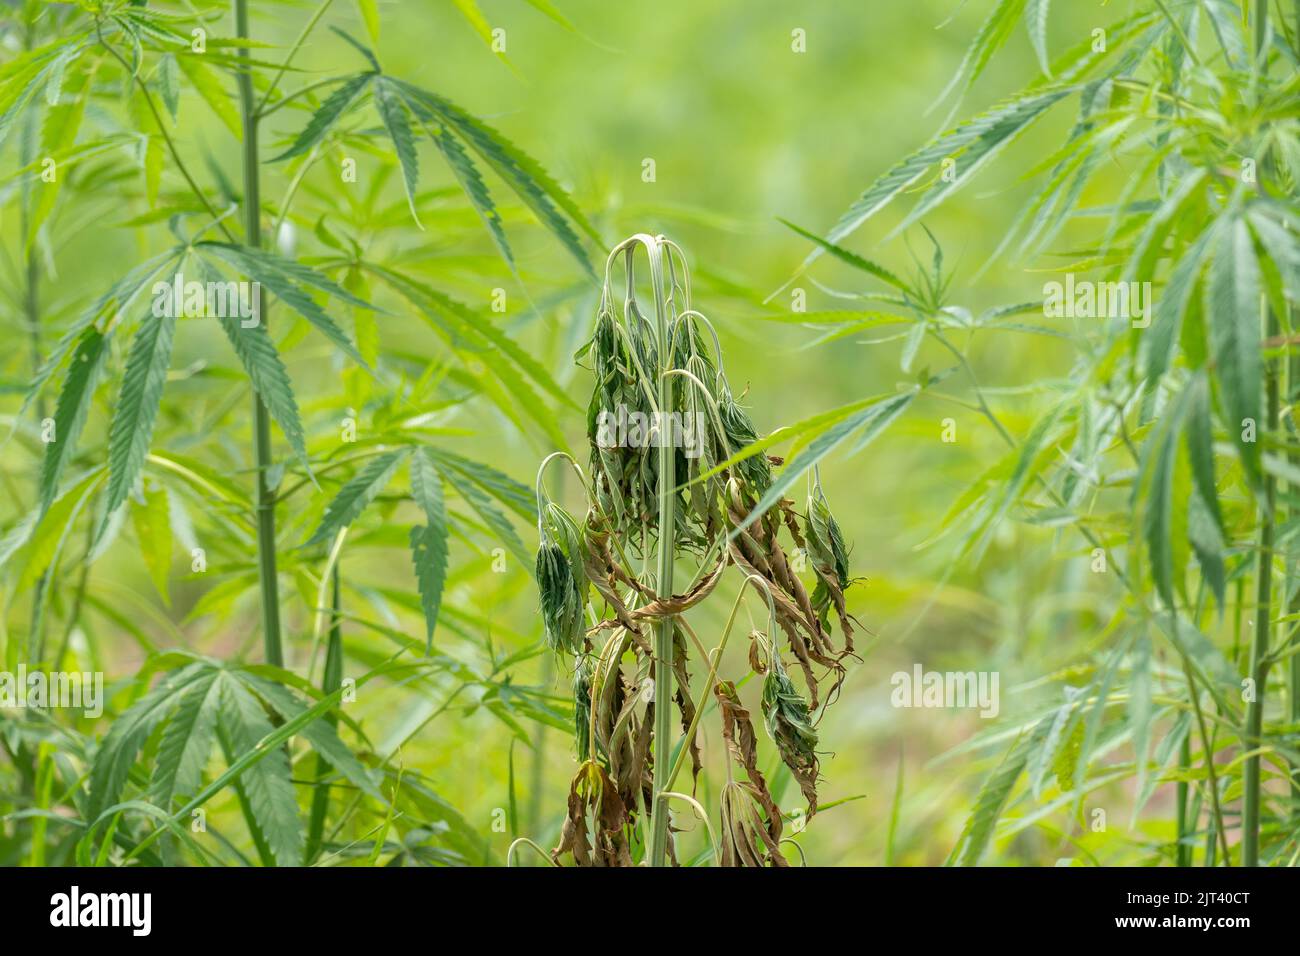 Fusarium wilt disease of cannabis in field caused by fungi and over watering. Stock Photo